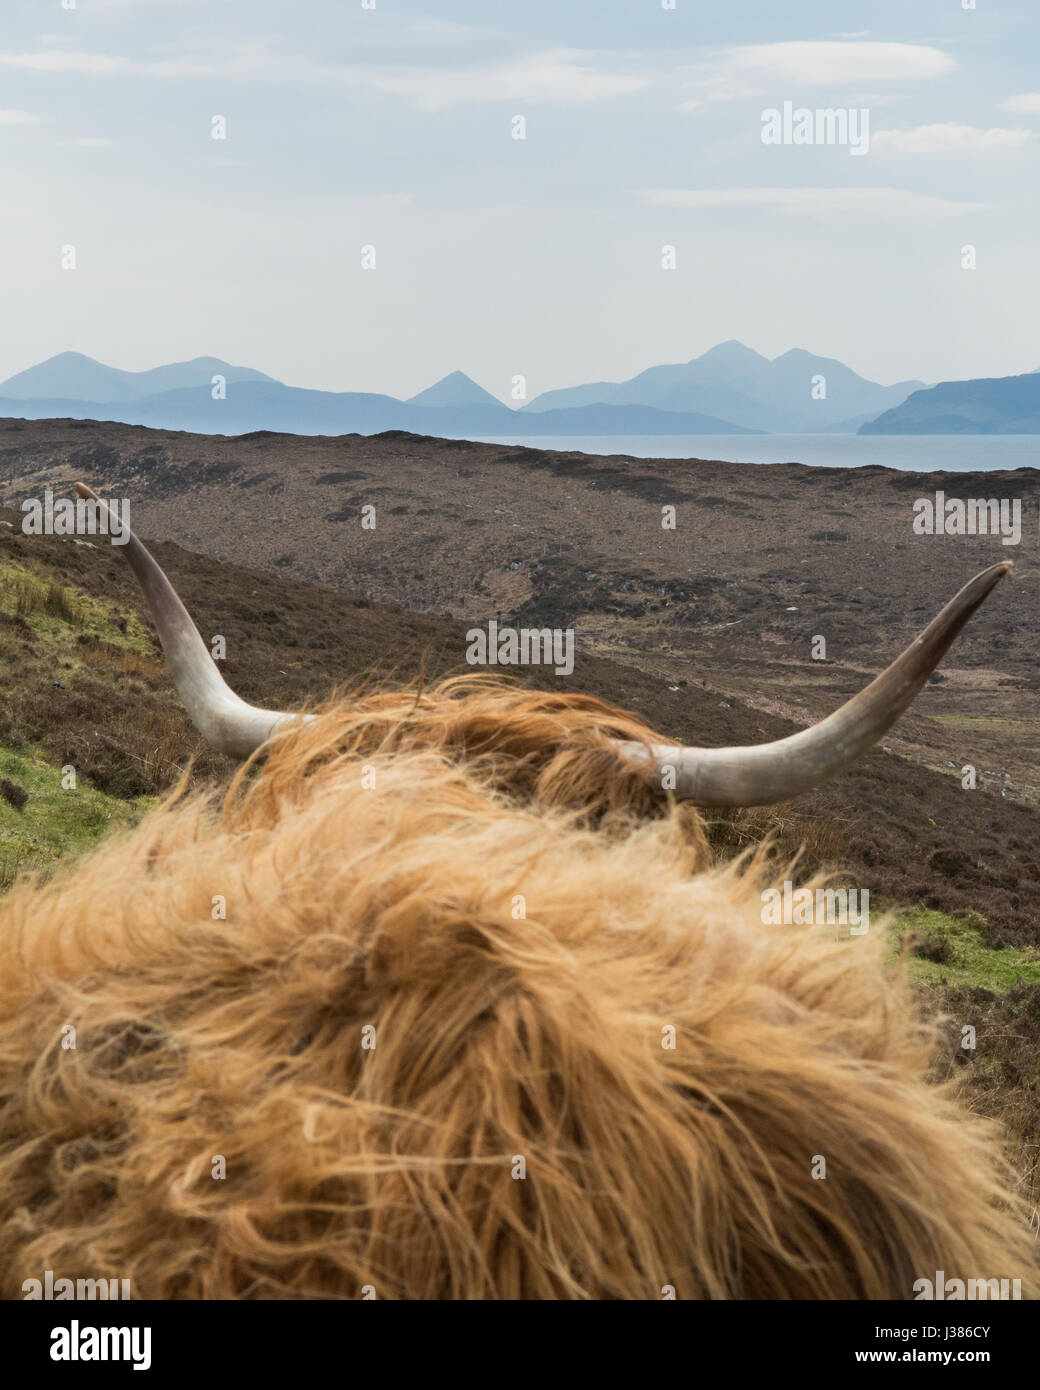 The Cuillins Cuillin range Isle of Skye seen through the horns of a Highland Cow near Applecross, Scottish Highlands Stock Photo